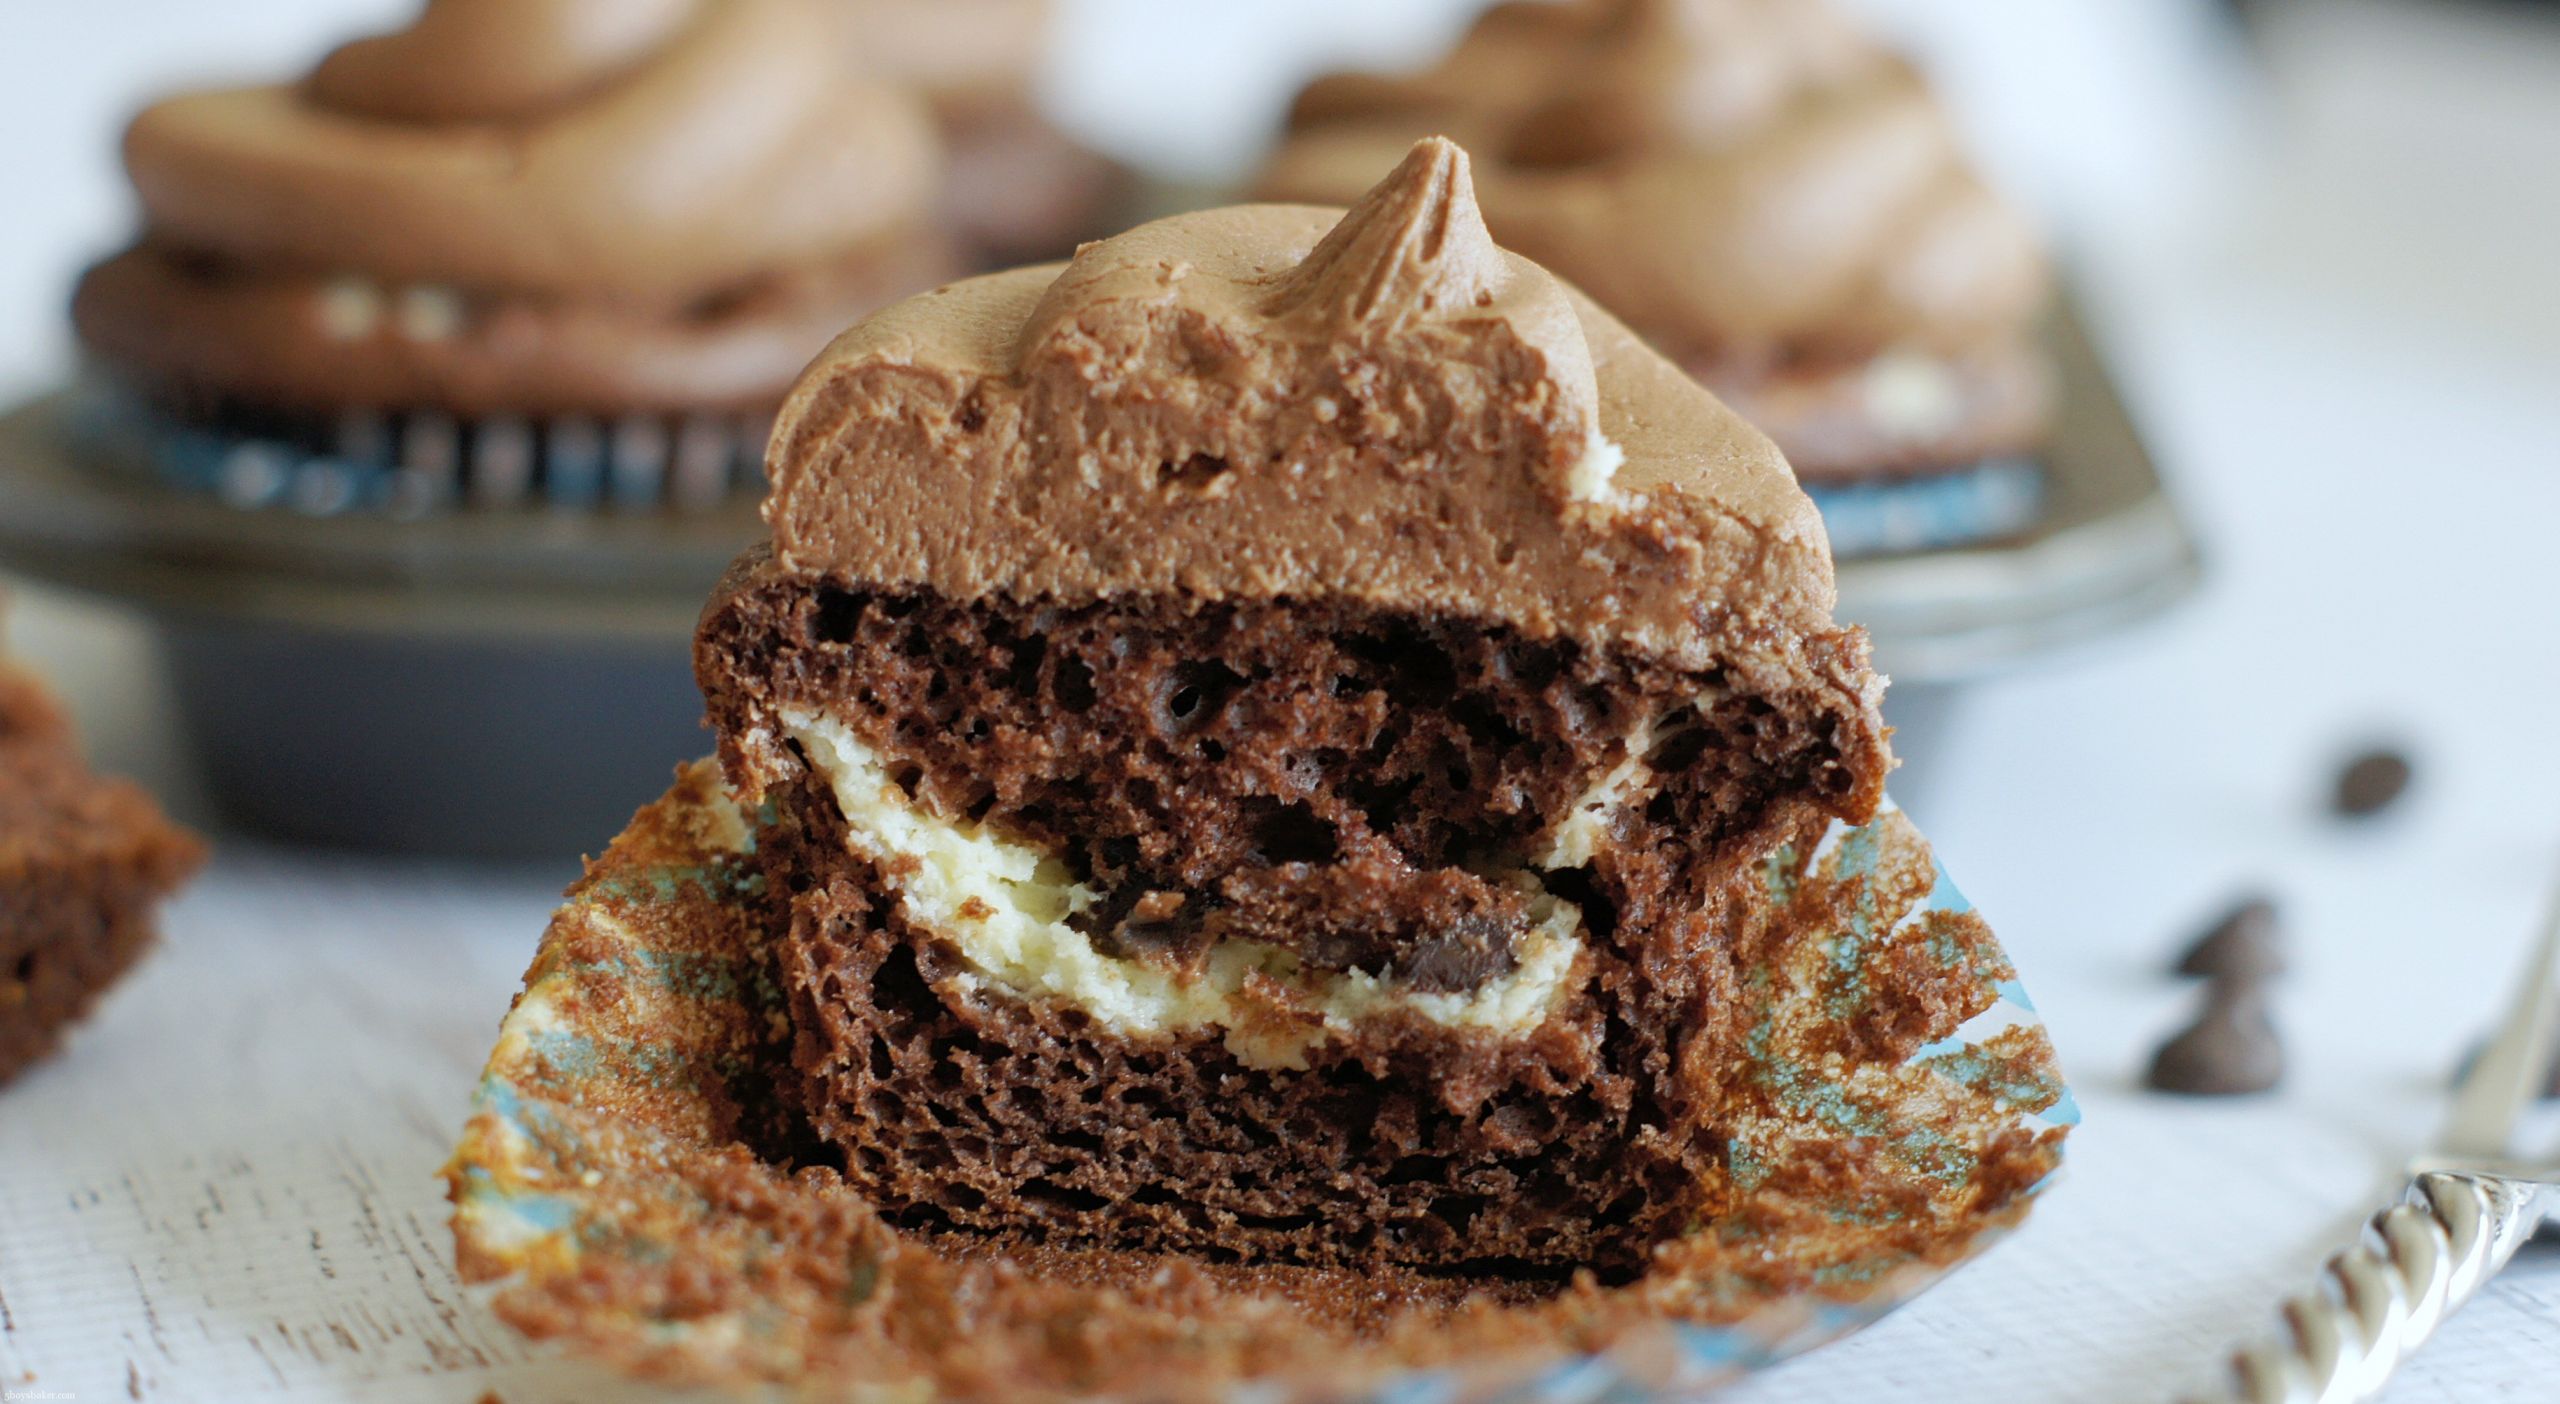 Chocolate Cupcakes With Cream Cheese Filling
 Chocolate Cream Cheese Filled Cupcakes – 5 Boys Baker